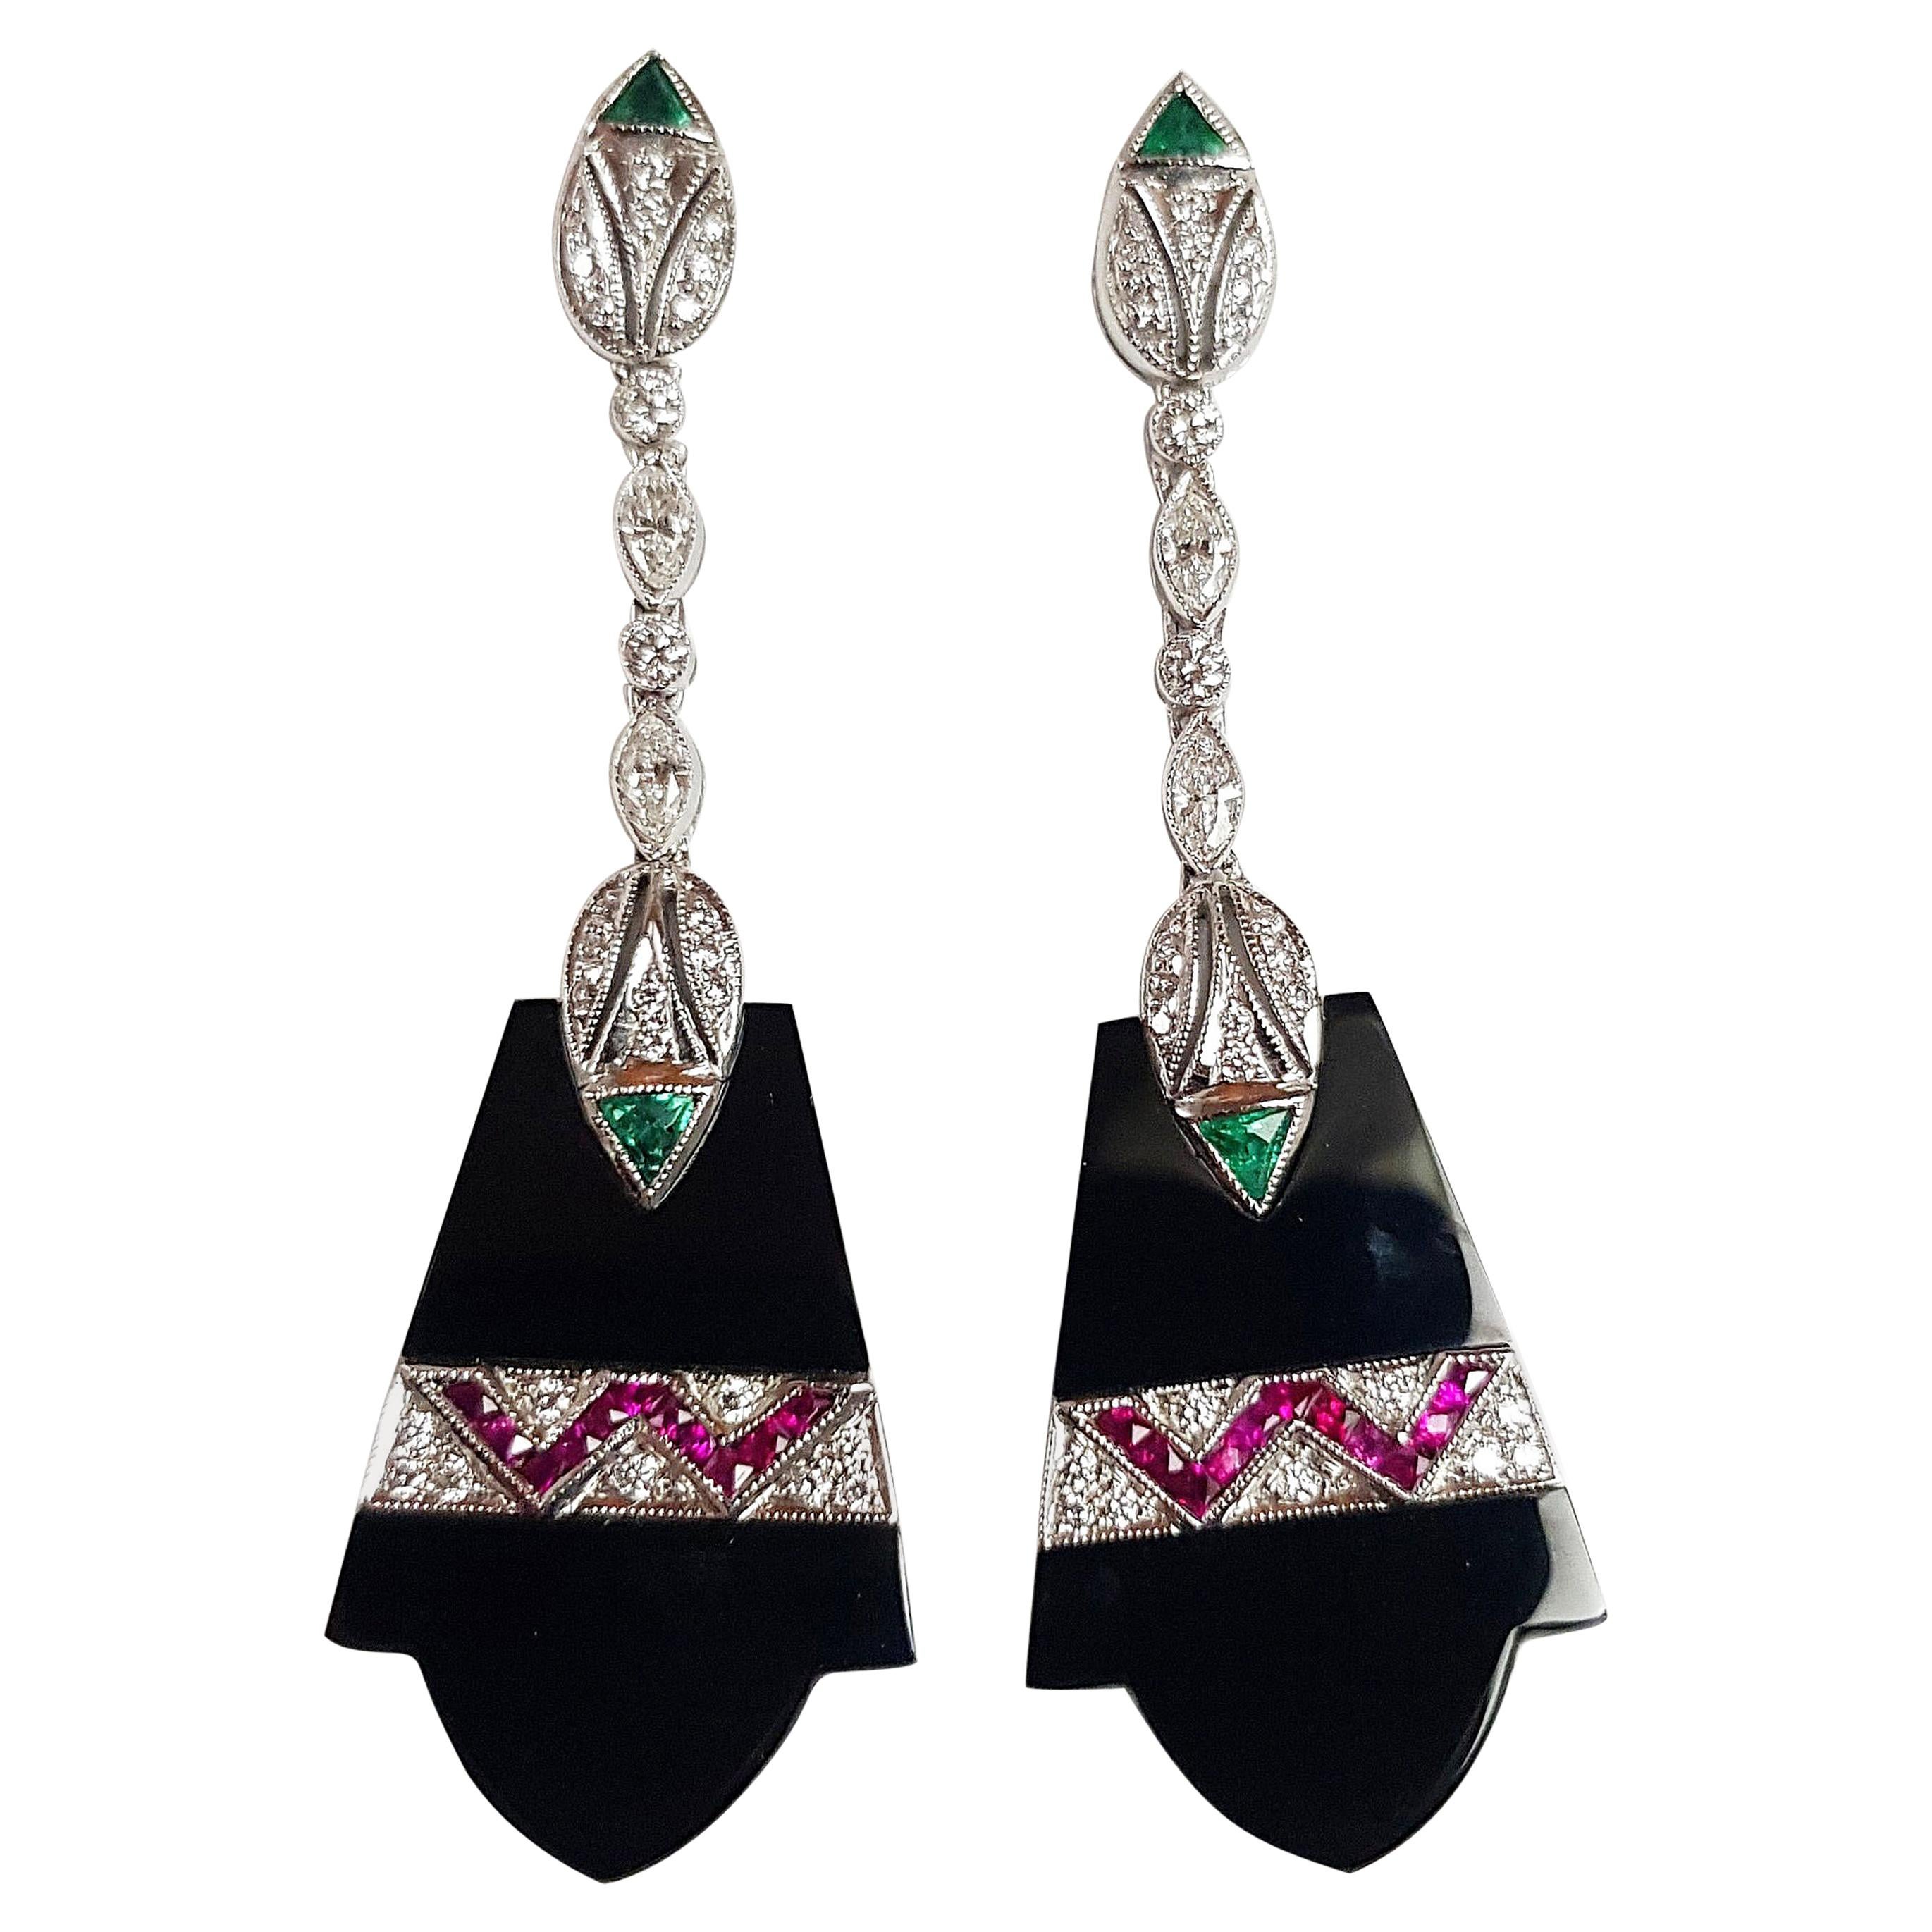 Onyx with Emerald, Ruby and Diamond Earrings set in 18 Karat White Gold Settings